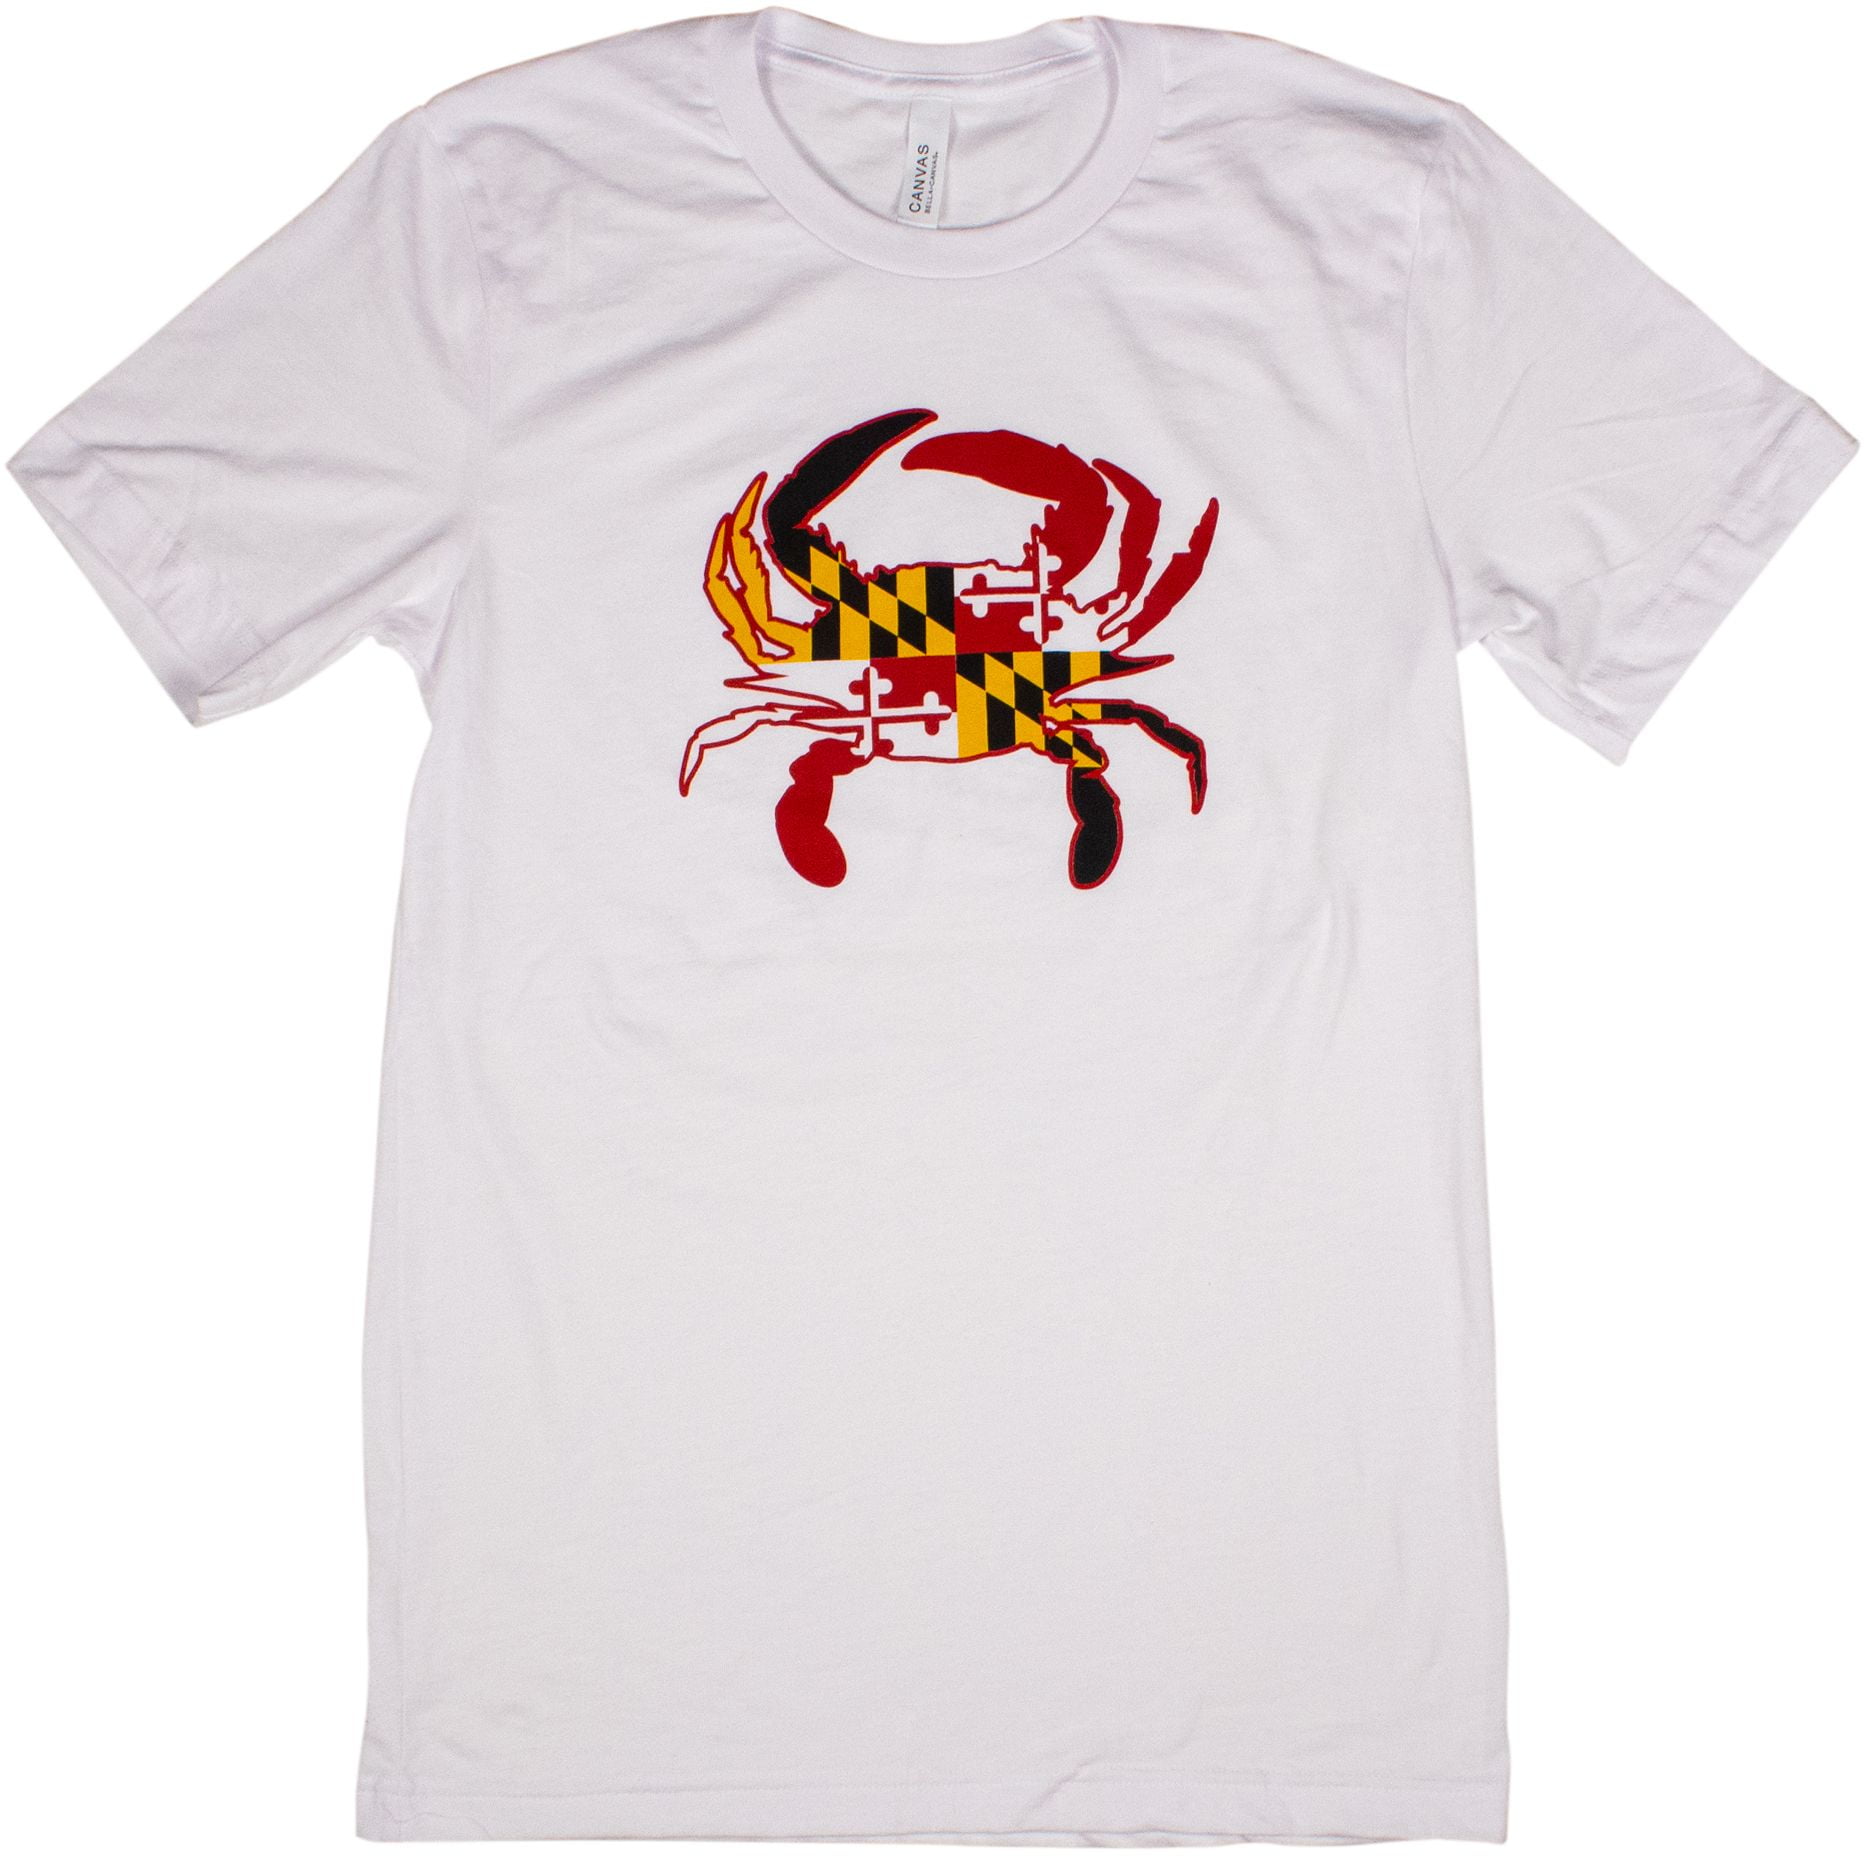 Home State Apparel - Home State Apparel Men's Maryland Crab With Flag ...